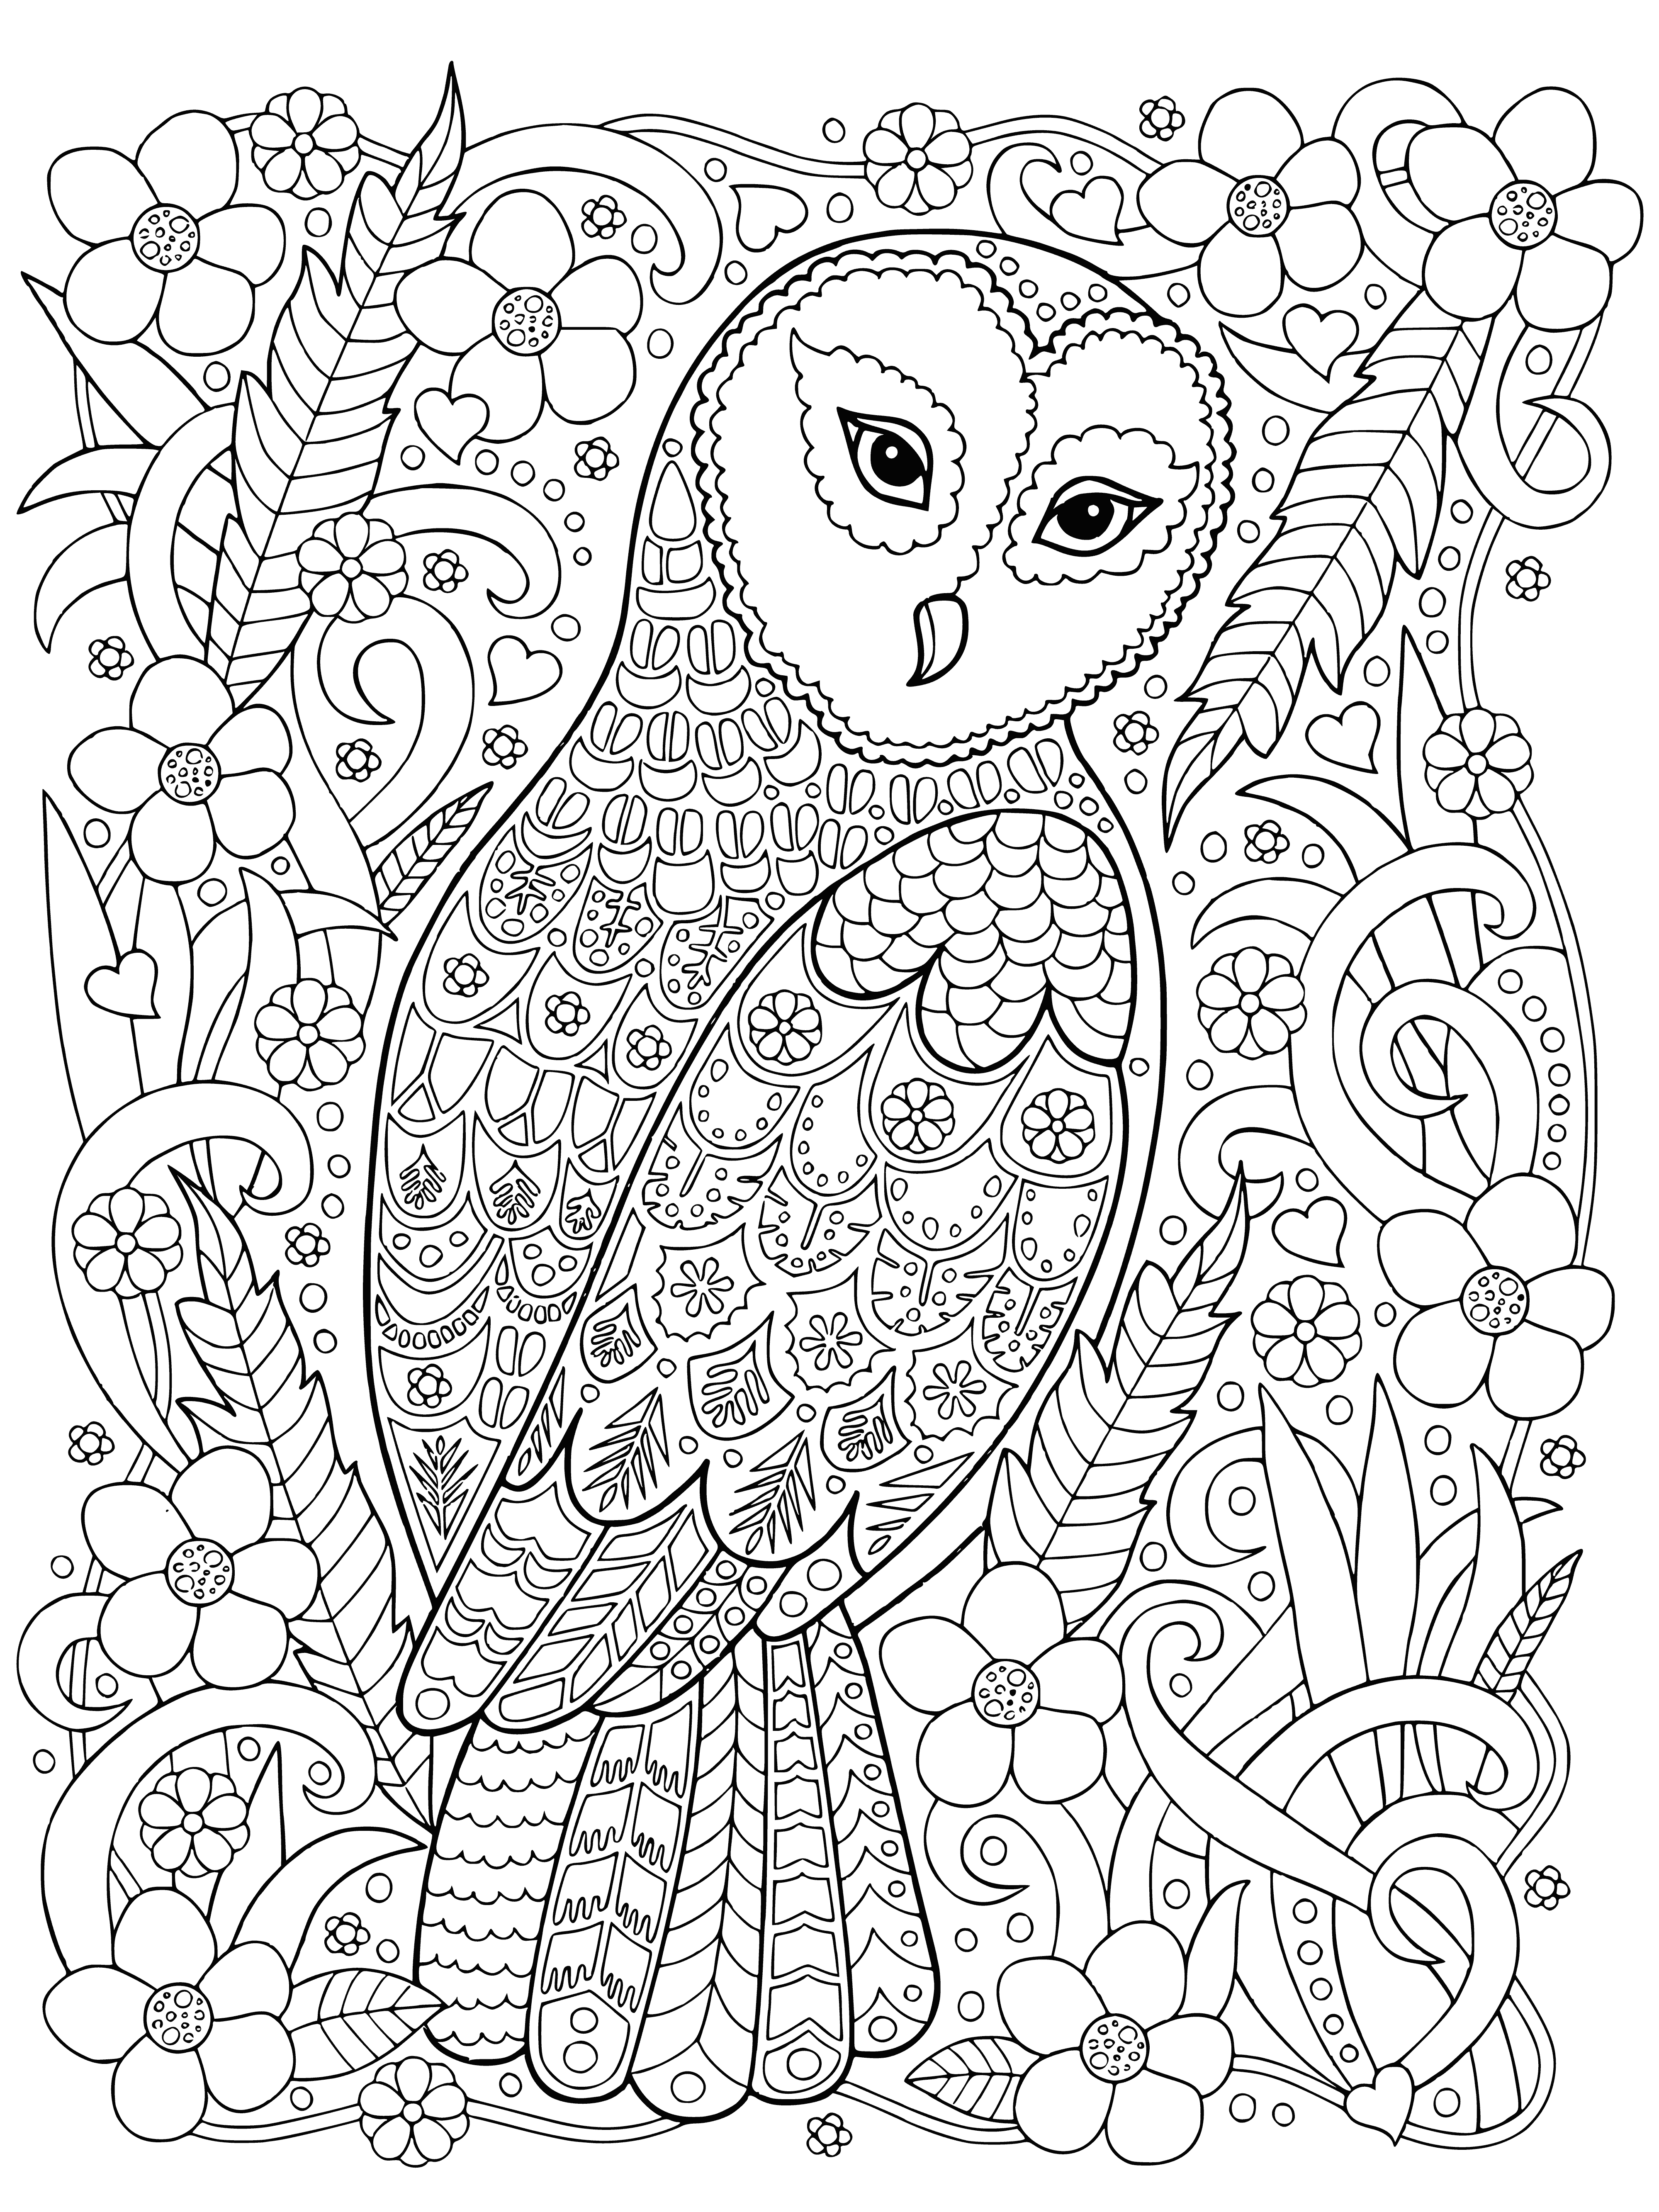 Polar owl coloring page